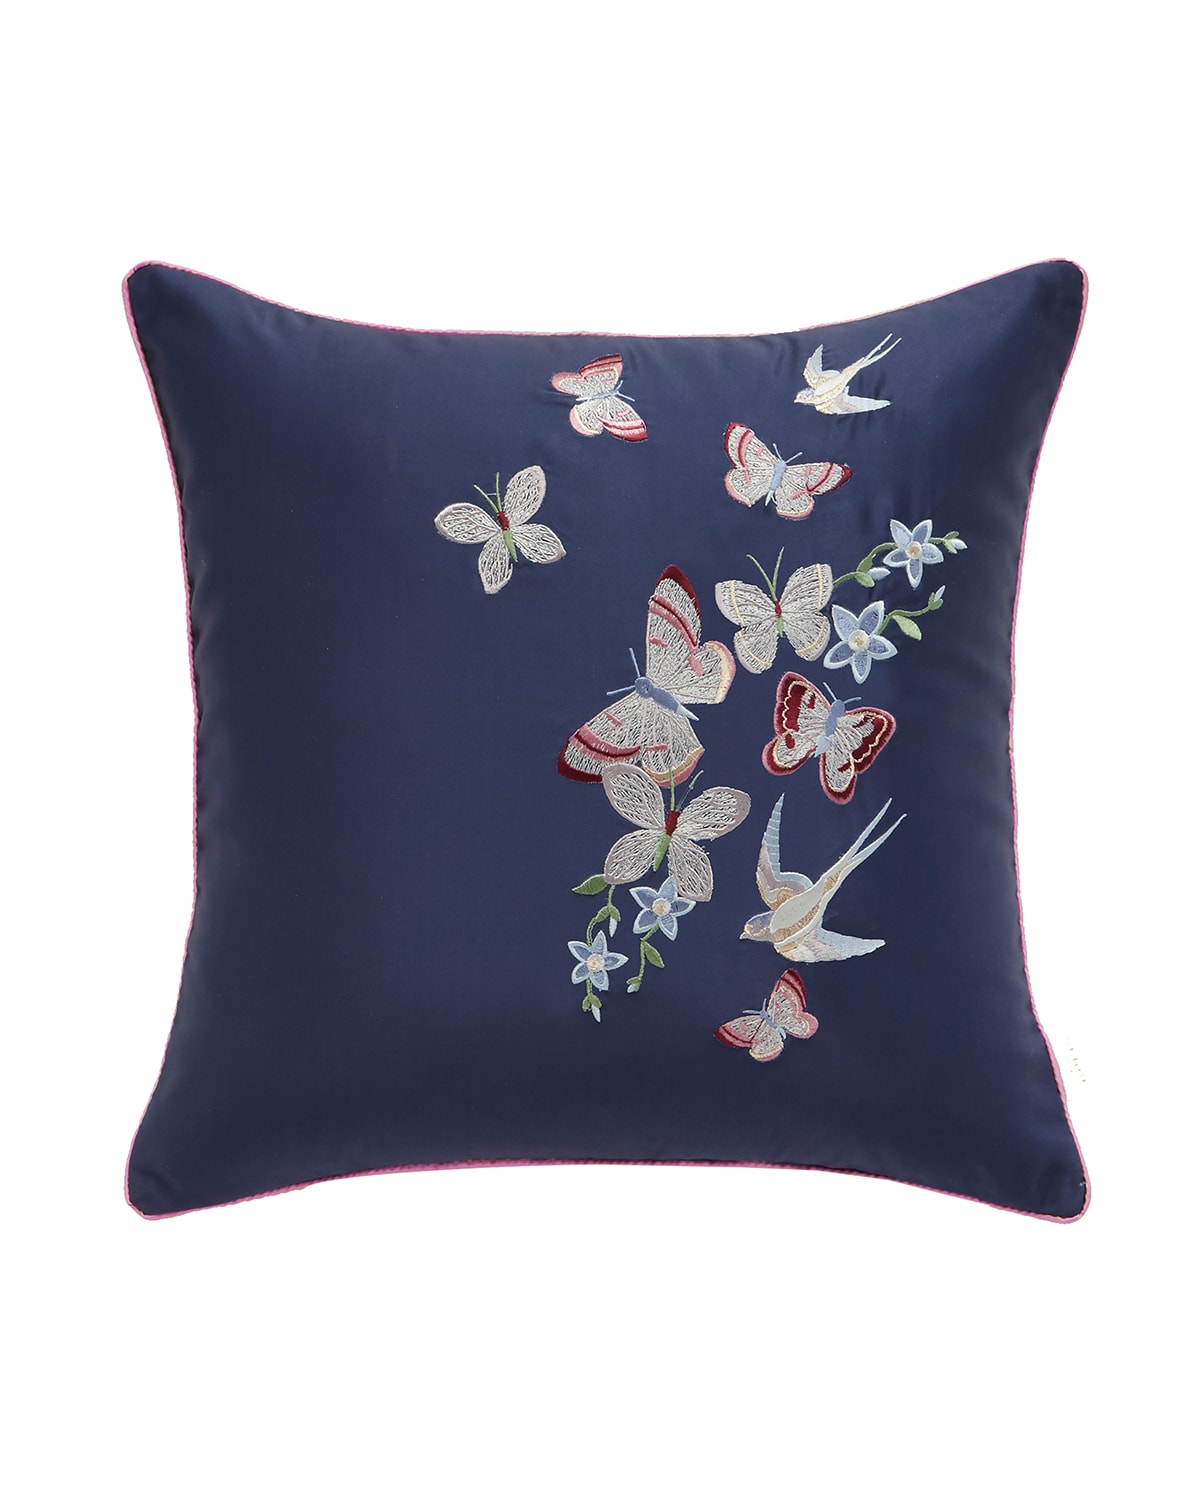 Image Ted Baker London Embroidered Floral Pillow